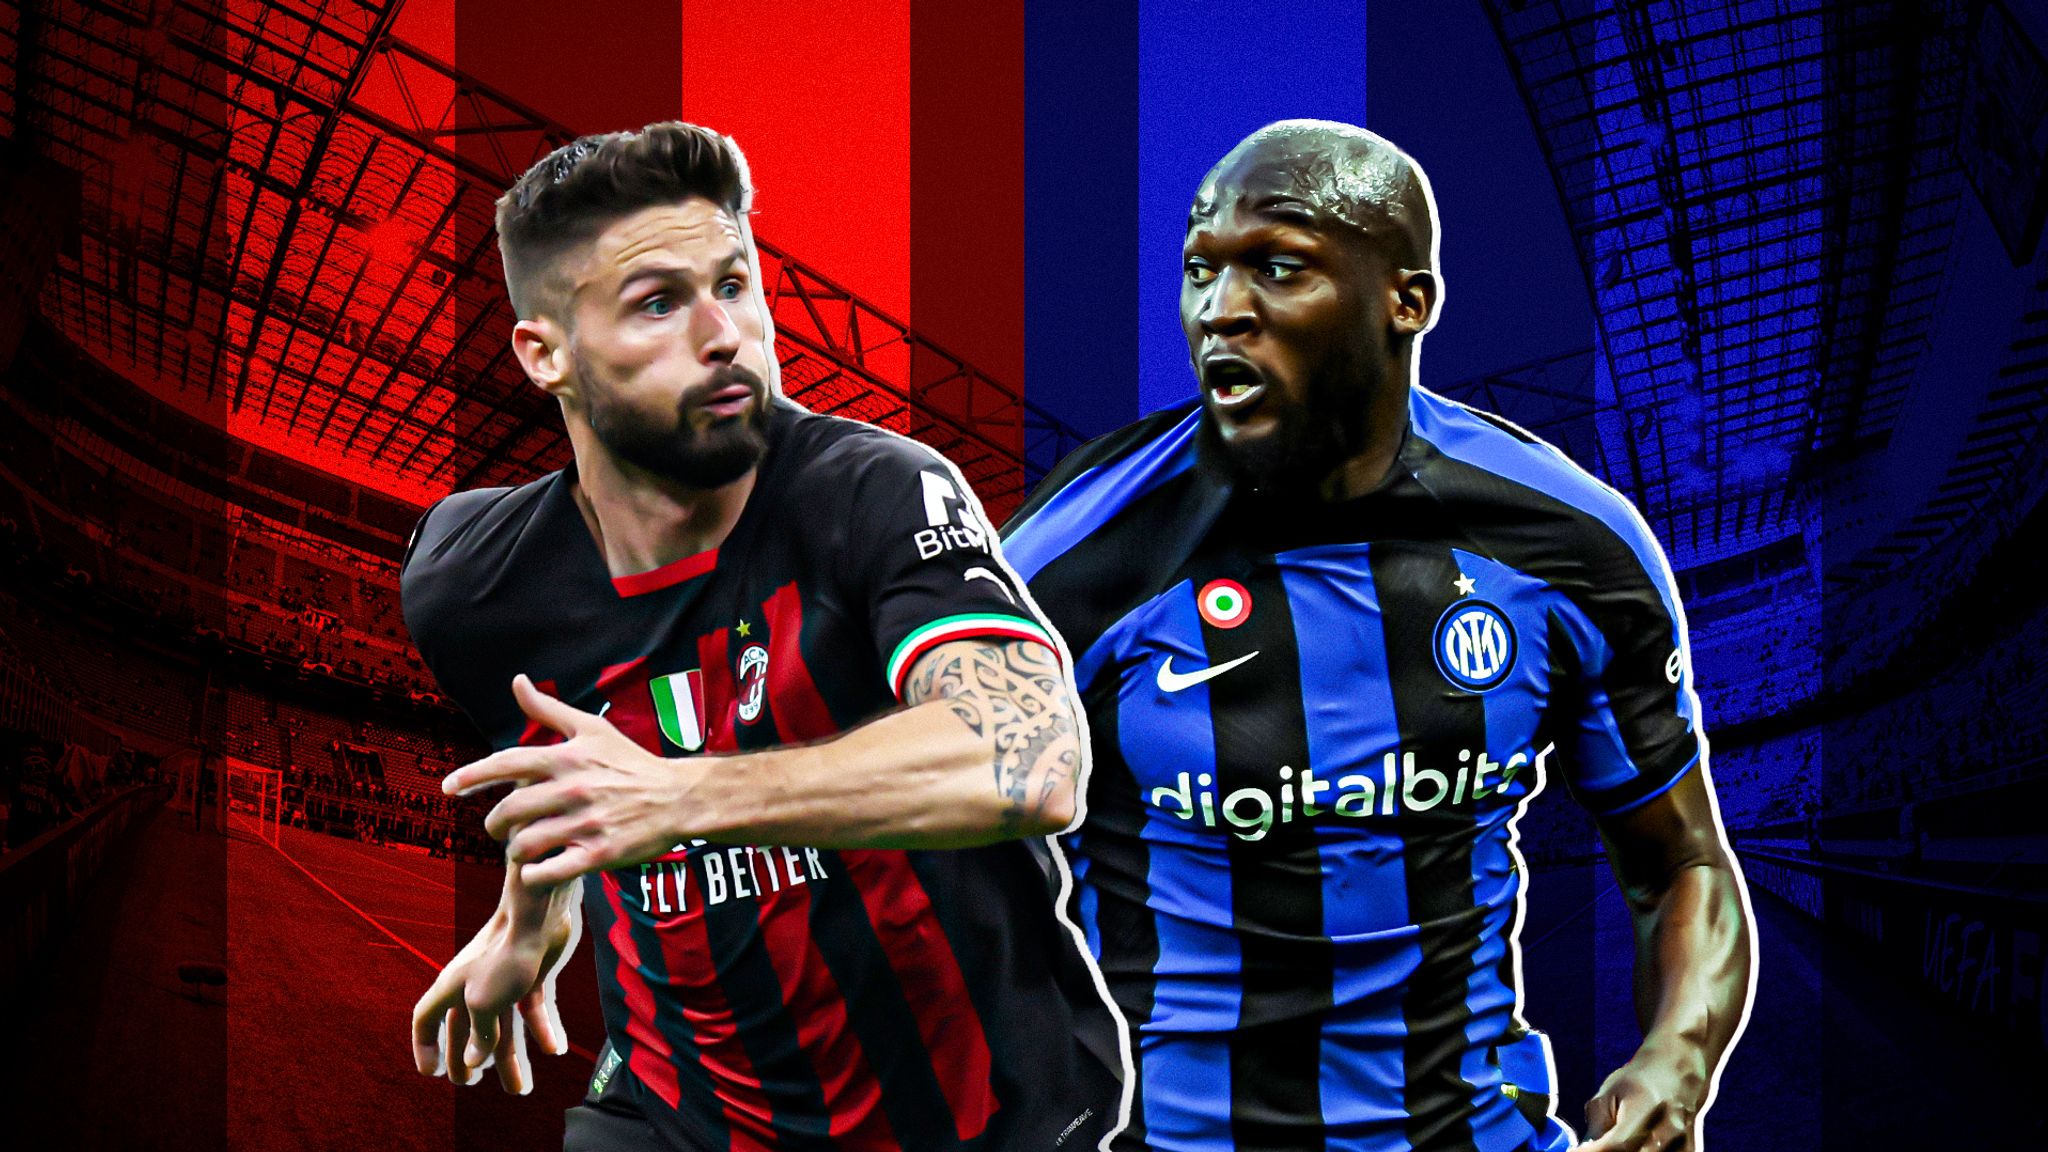 AC Milan vs Inter: Analysing the Milan clubs ahead of derby in Champions League semi-final | Football News | Sky Sports